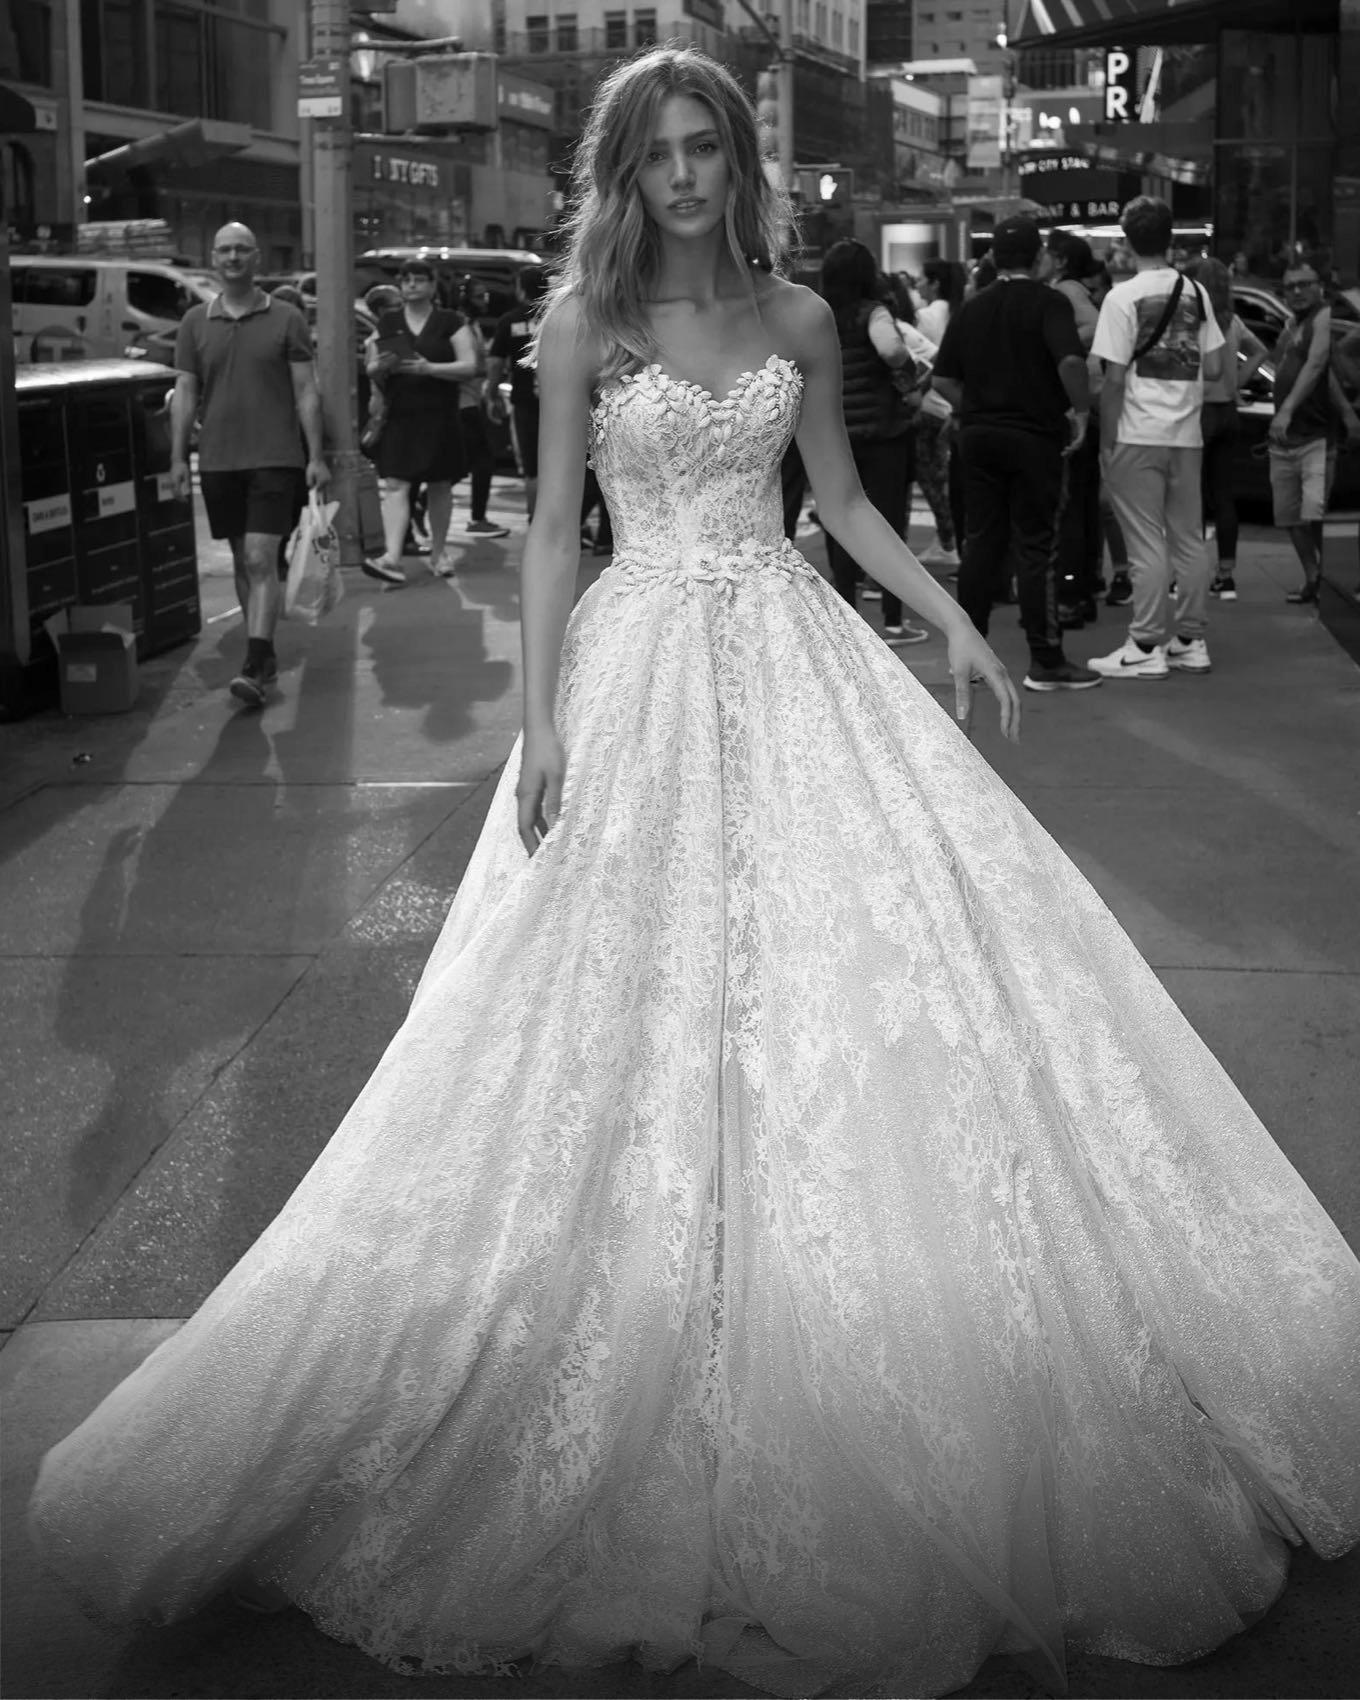 Model wearing a white gown by Ballgown